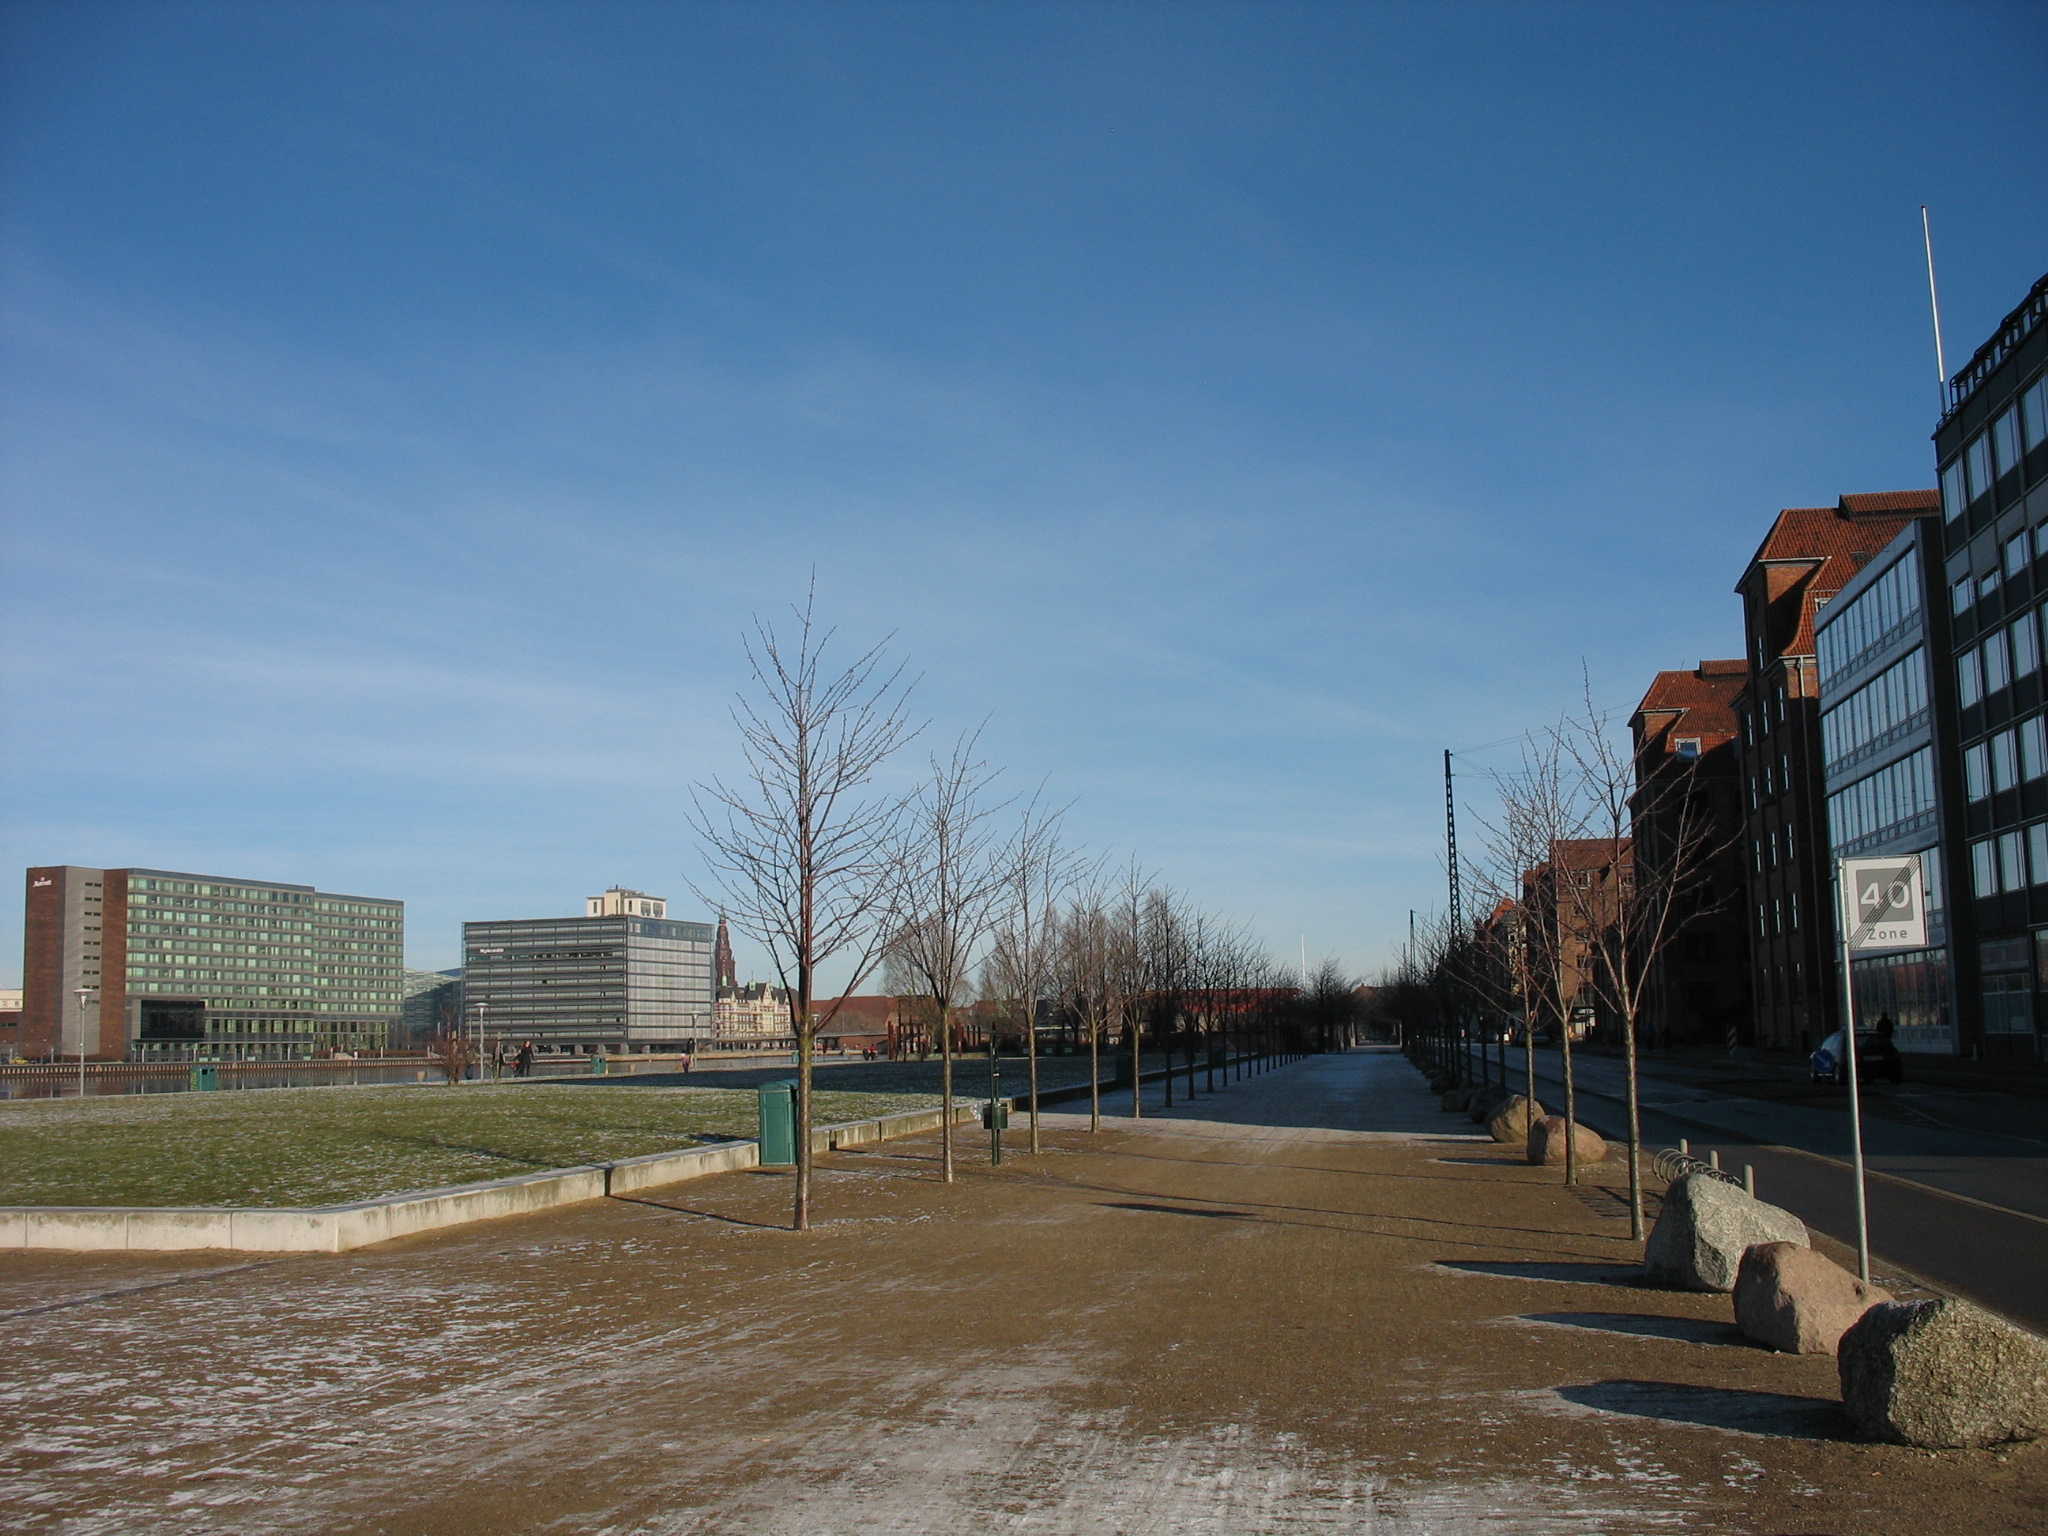 a view of an empty parking lot with buildings